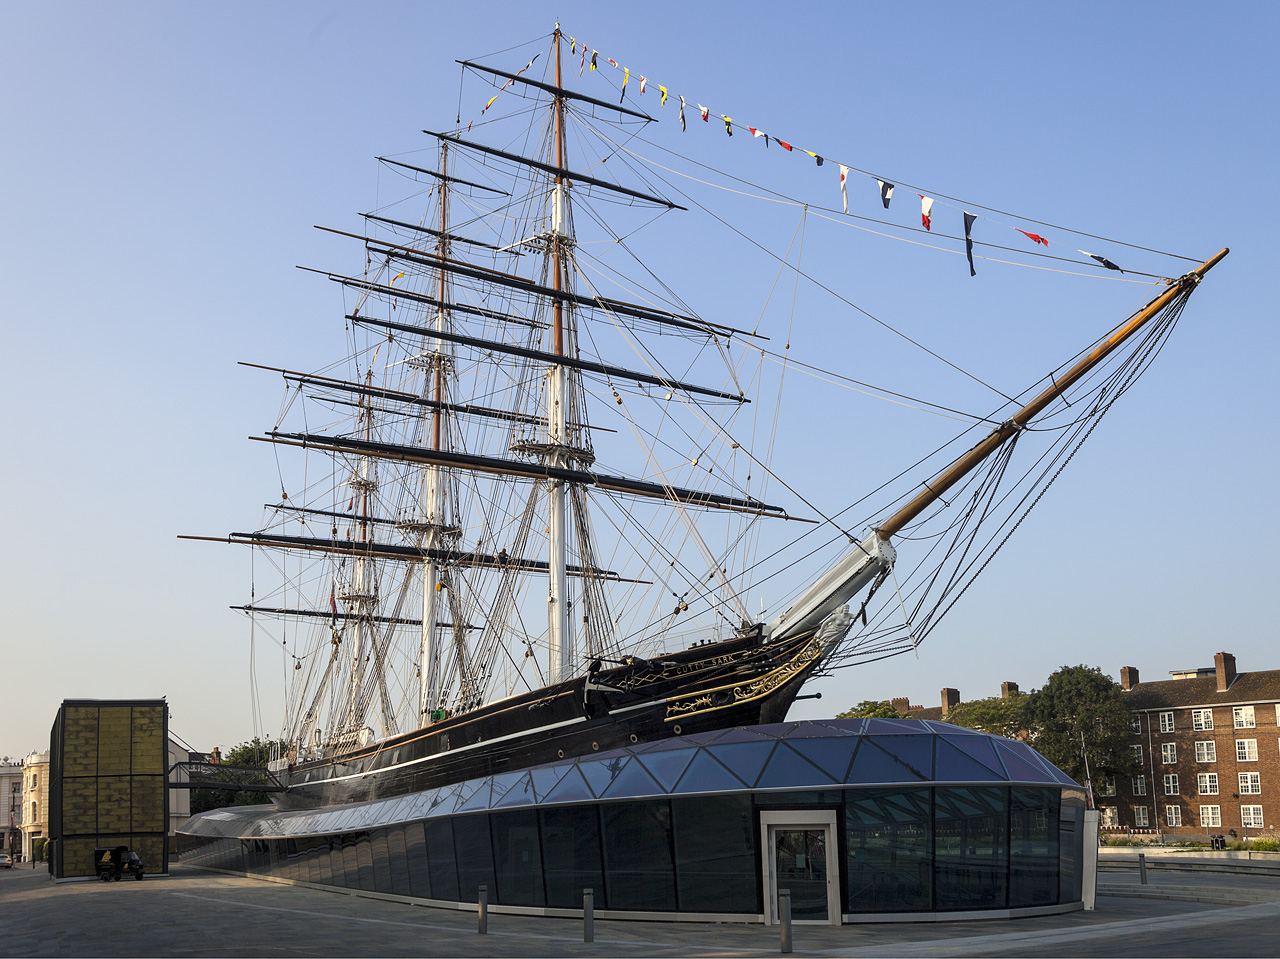 The Cutty Sark in all its glory.